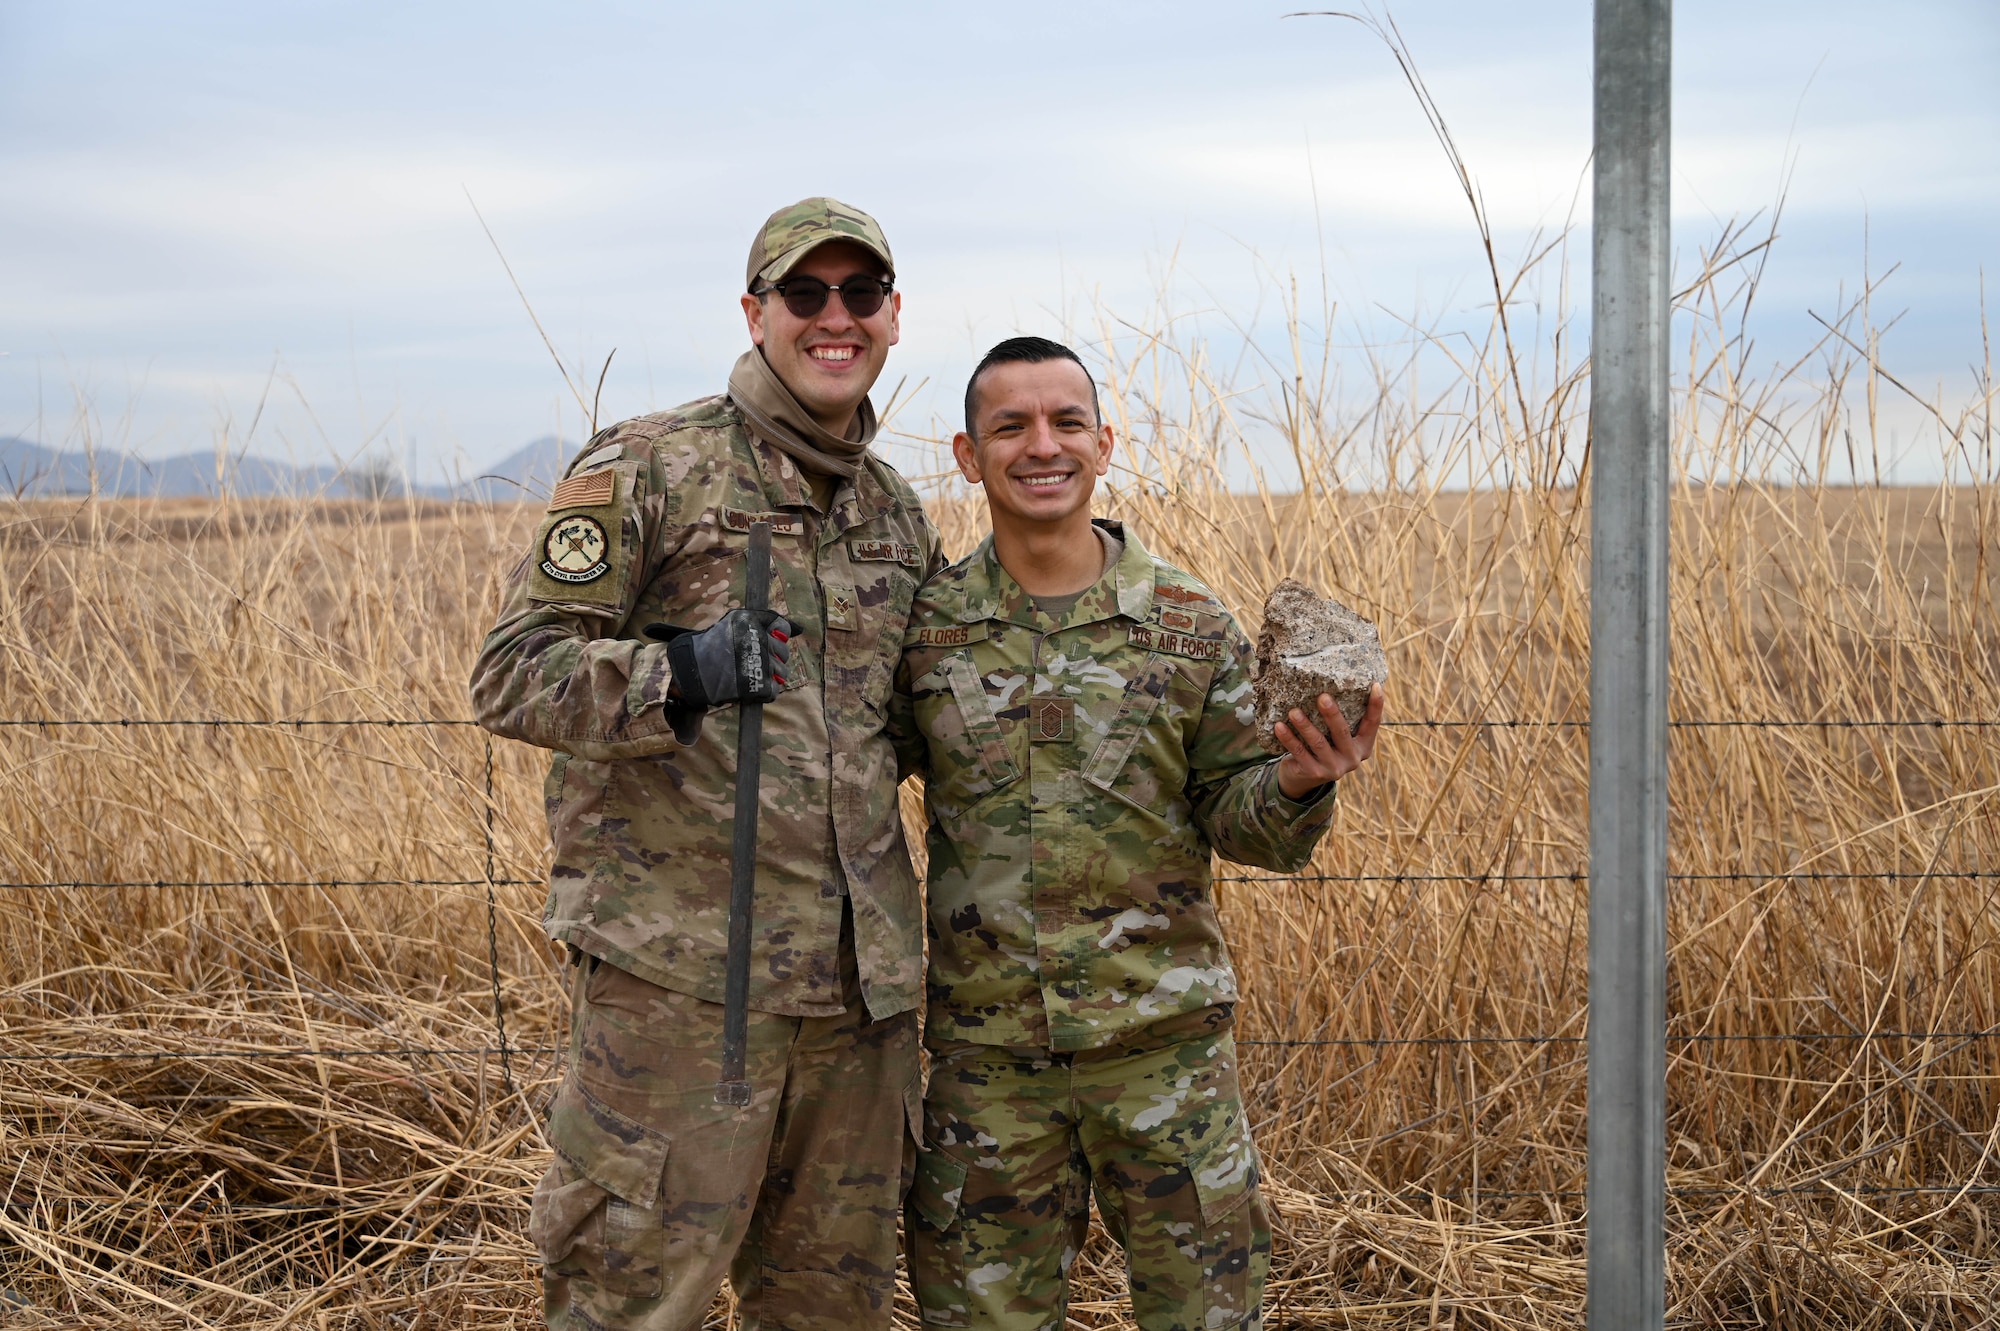 U.S. Air Force Senior Airman James Gonzales, 97th Civil Engineering Squadron equipment operator, and Chief Master Sergeant Ceasar Flores, 97th Air Mobility Wing command chief, pose for a photo at Altus Air Force Base, Oklahoma, Dec. 17, 2021. Flores helped Gonzales remove a pin from a fence with the rock he is holding. (U.S. Air Force photo by Airman 1st Class Kayla Christenson)